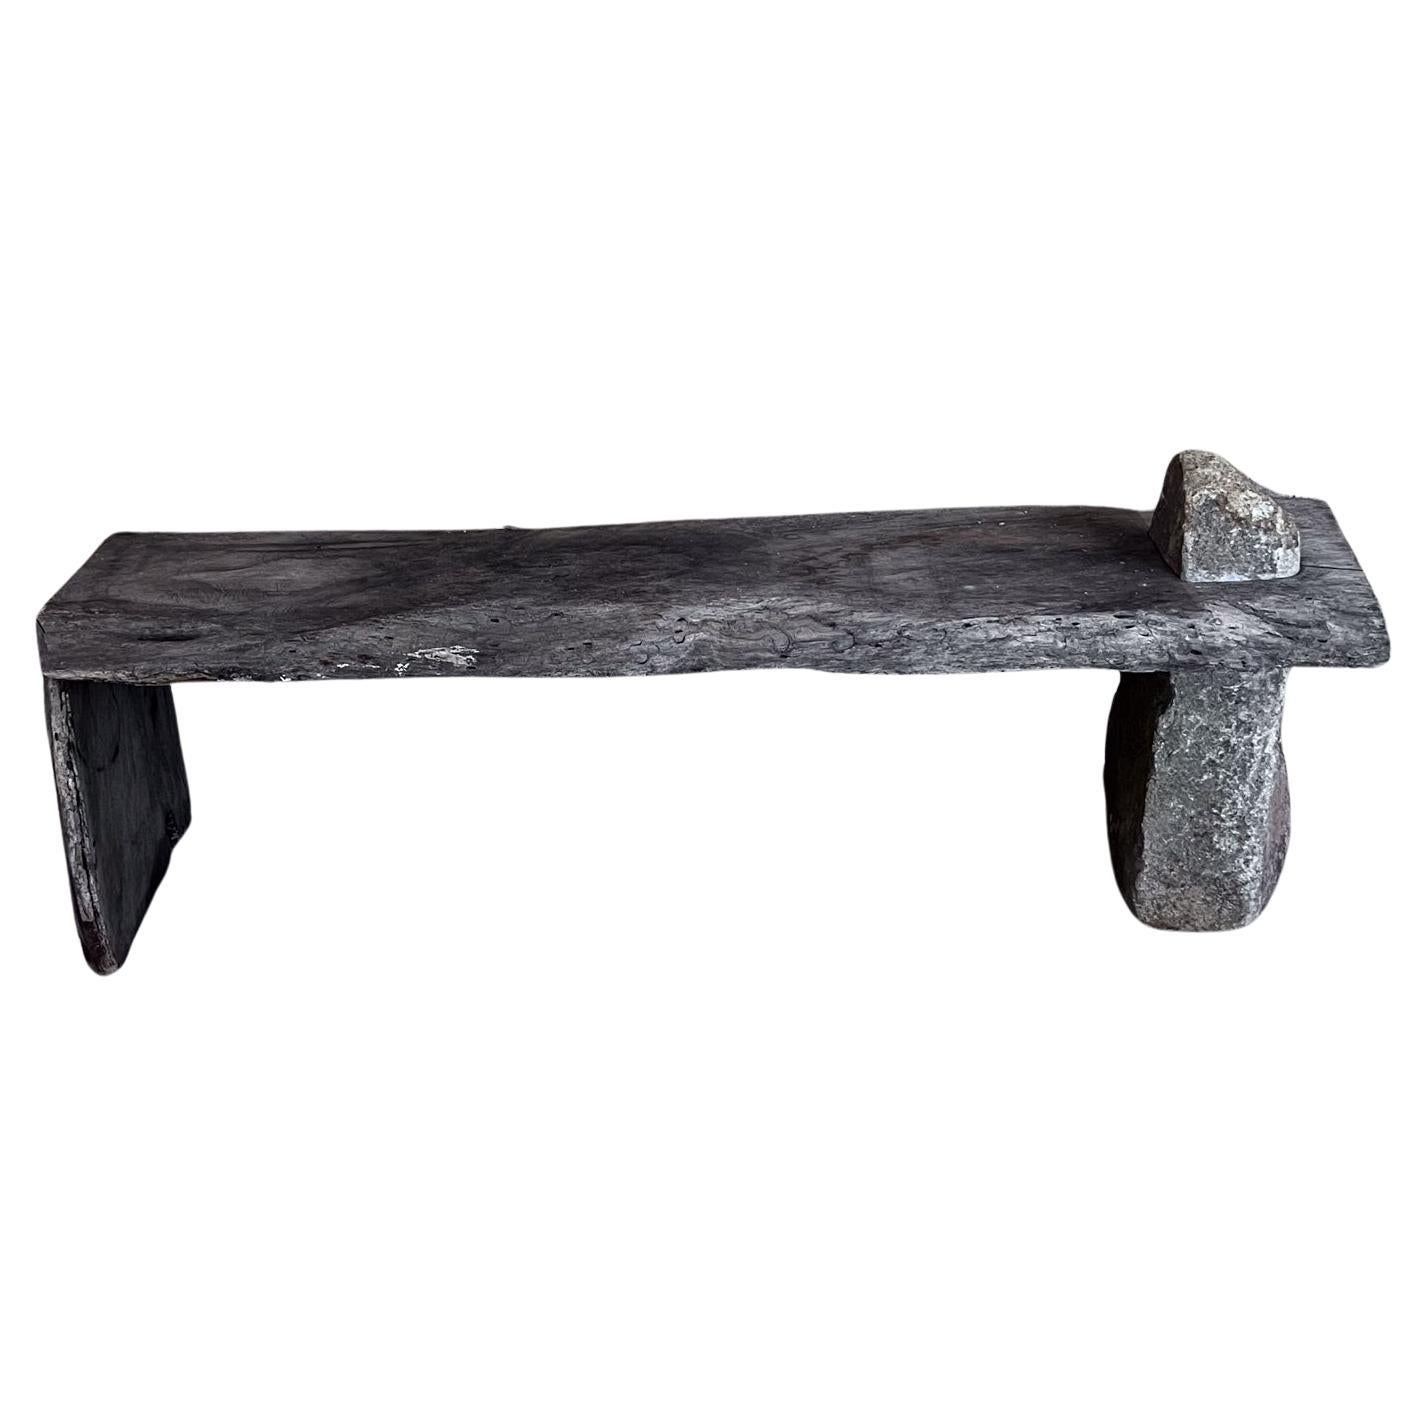 Primitive Rustic Bench Spanish Mesquite Wood and Rock Stone For Sale